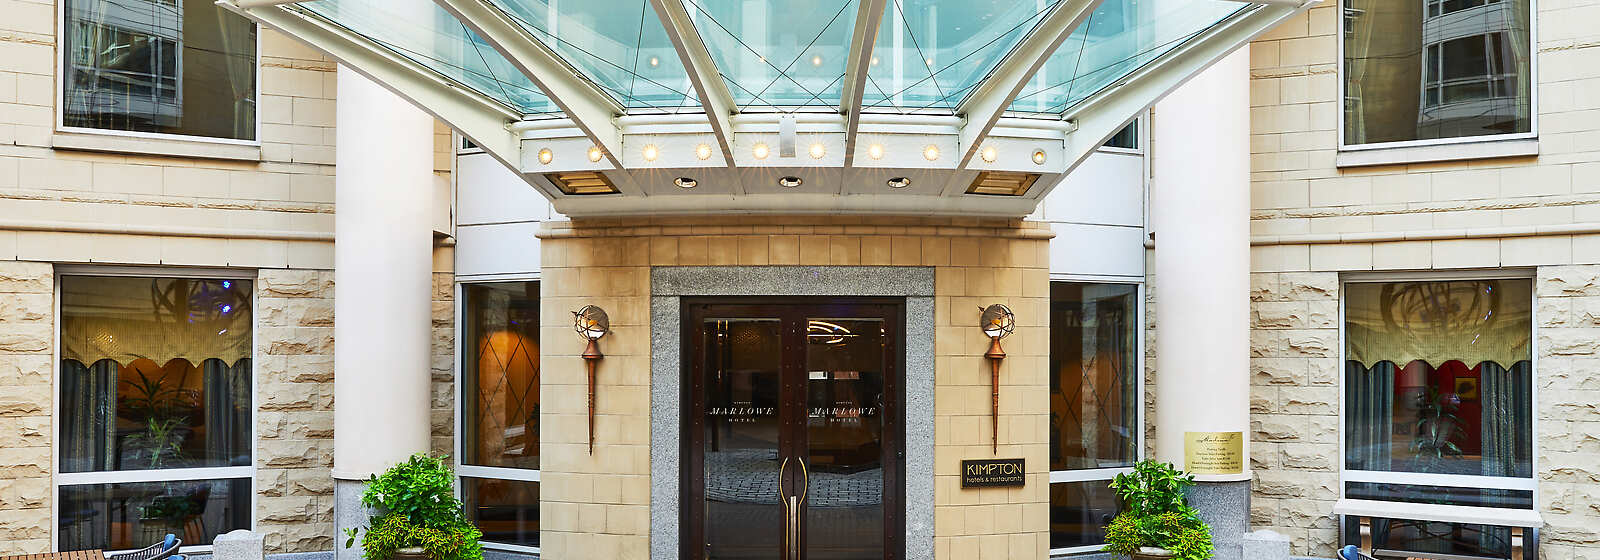 Lobby Entrance from the Courtyard